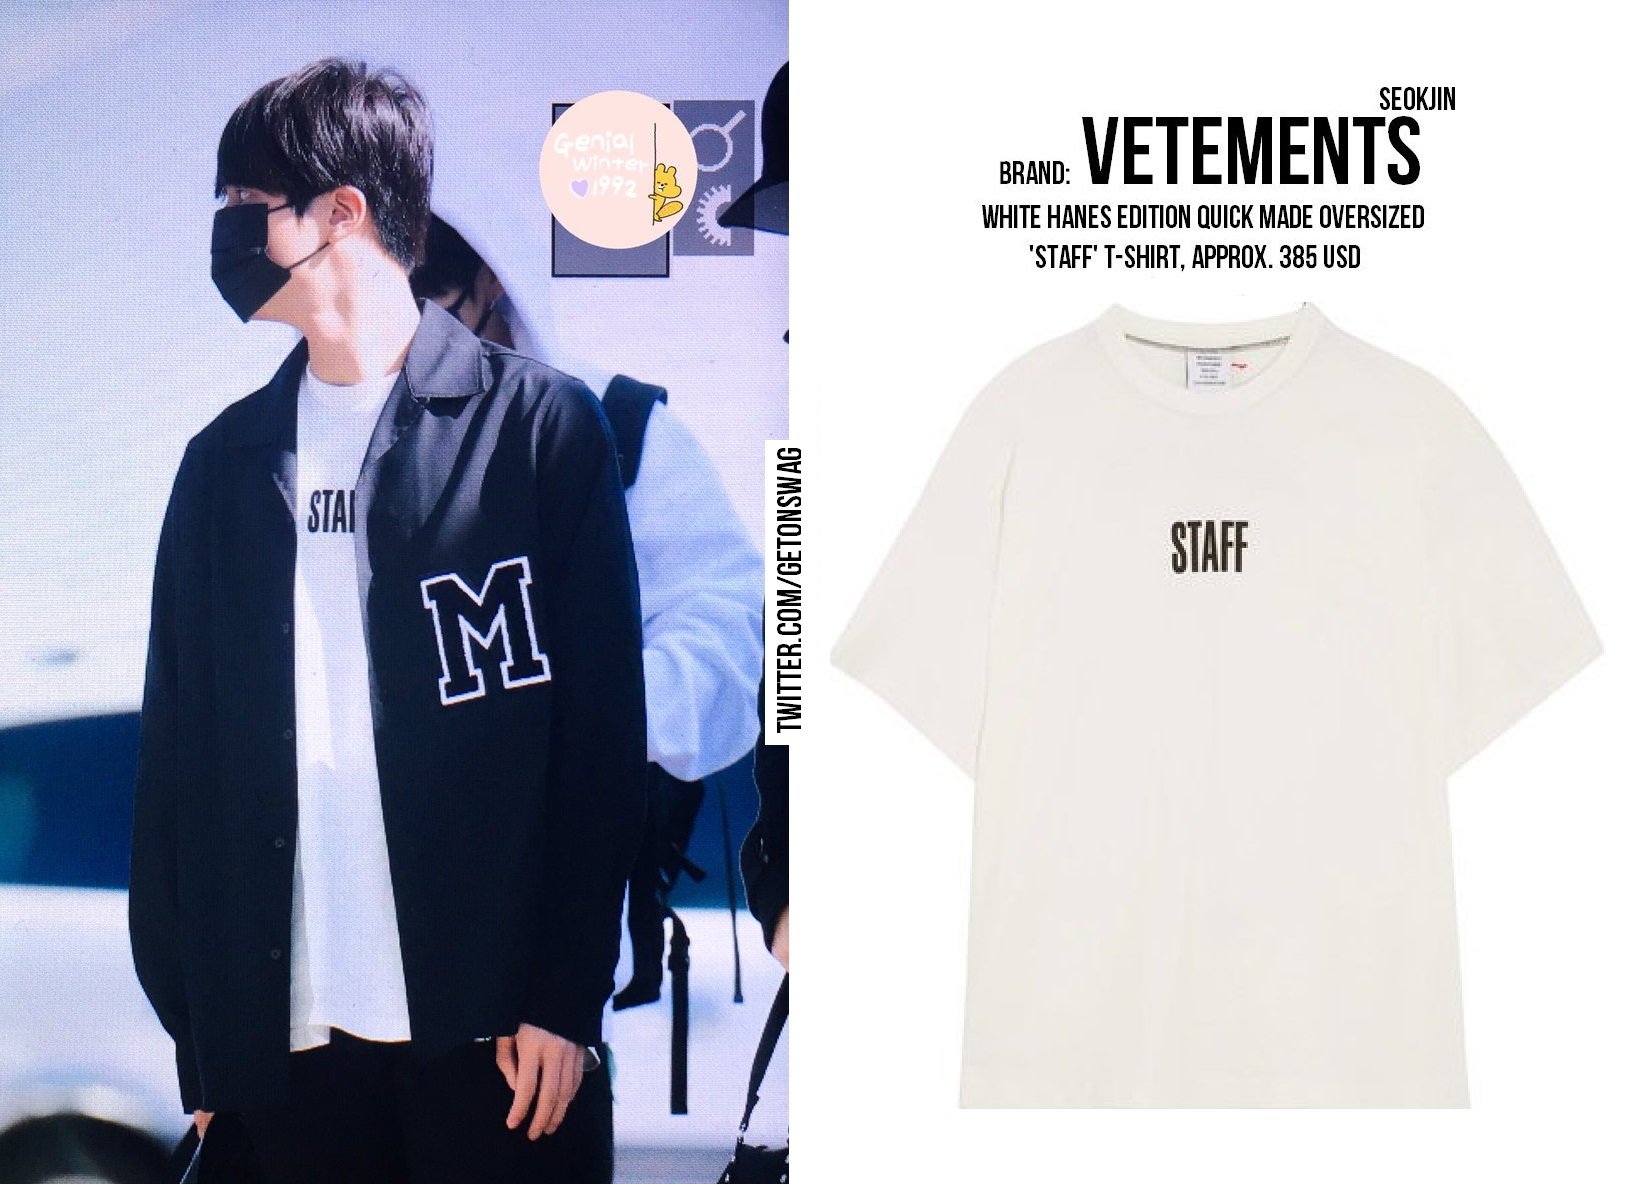 Beyond The Style ✼ Alex ✼ on X: JIN #BTS 171023 airport #JIN #방탄소년단 #진 #석진  VETEMENTS x Hanes White Edition Quick Made Oversized 'Staff' T-Shirt   / X